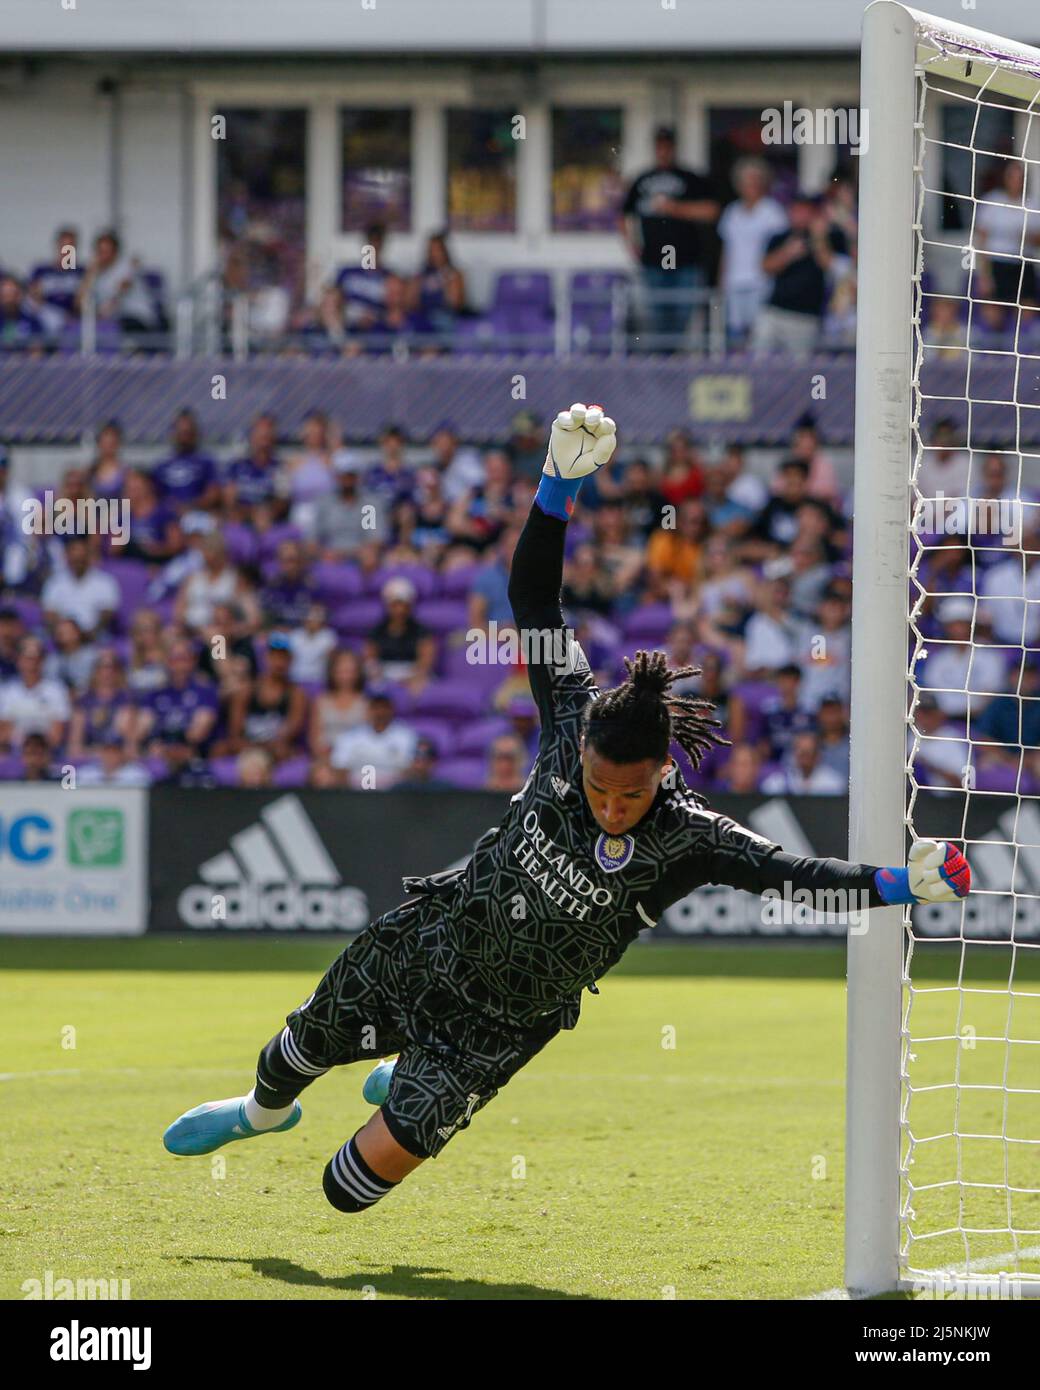 Orlando, FL:  Orlando City goalkeeper Pedro Gallese (1) knocks the ball away during an MLS game against the New York Red Bulls, Sunday, April 24, 2022 Stock Photo